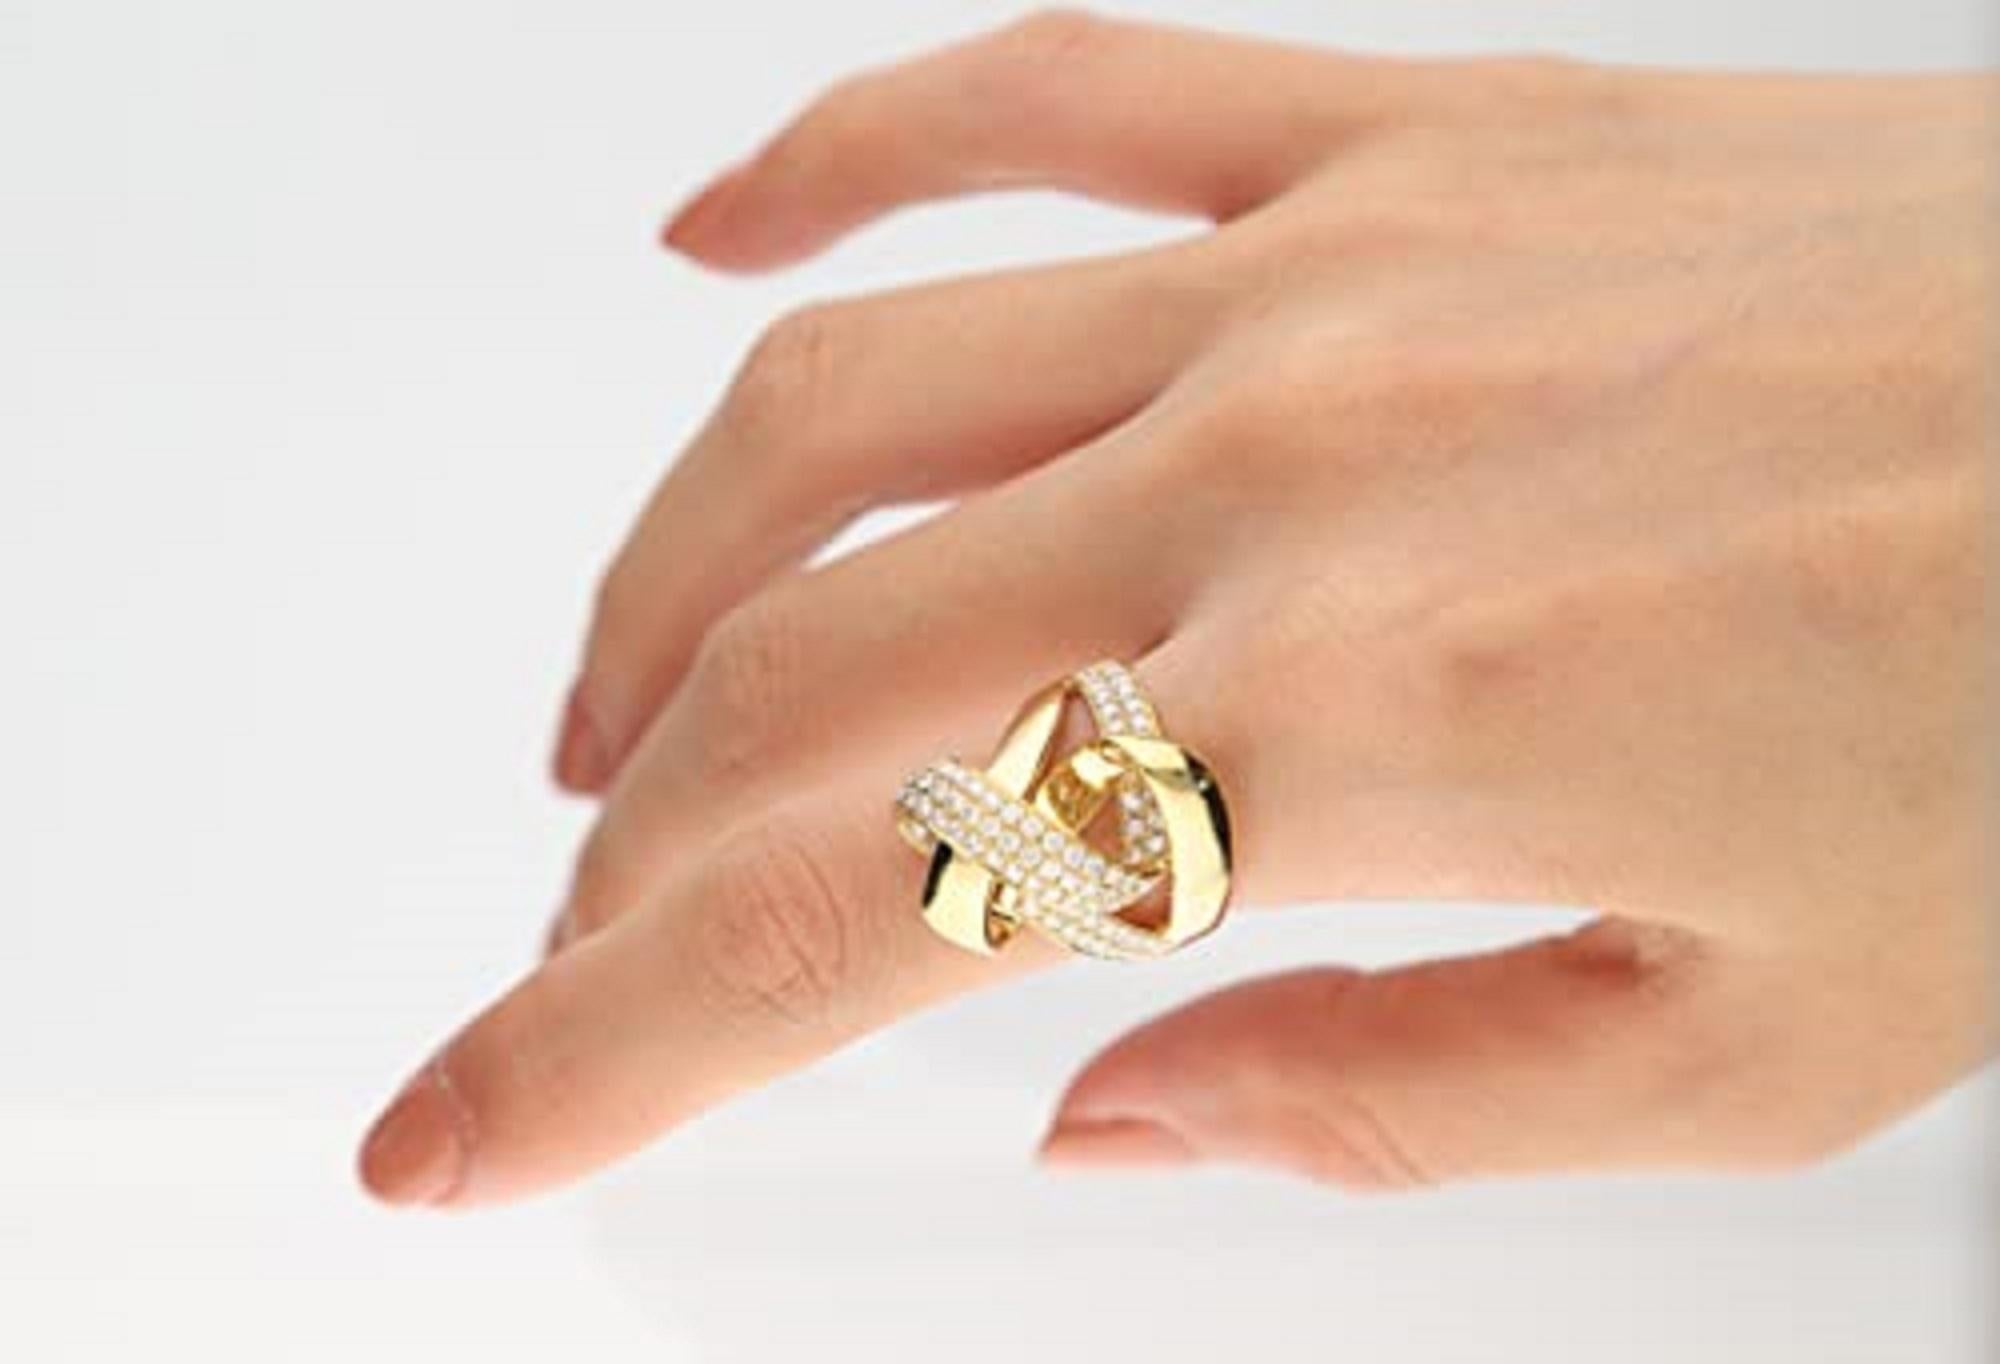 Decorate yourself in elegance with this Ring is crafted from 18-karat Yellow Gold by Gin & Grace. This Ring is made up of Round-cut Prong-Setting White Diamond (86 Pcs) 1.24 Carat . This Ring is weight 8.52 grams. This delicate Ring is polished to a